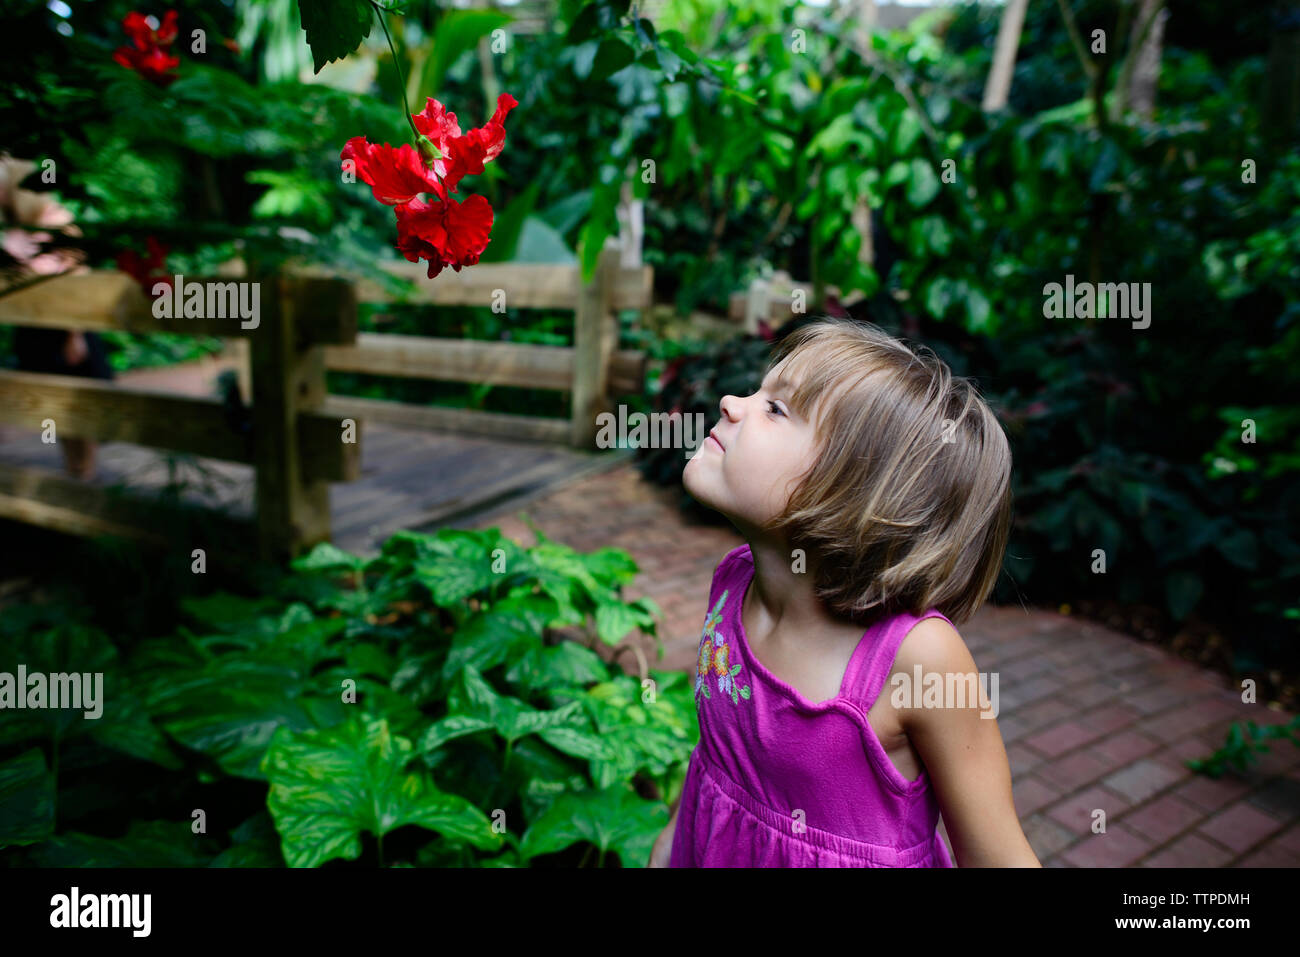 Girl making a face while looking at hibiscus in garden Stock Photo